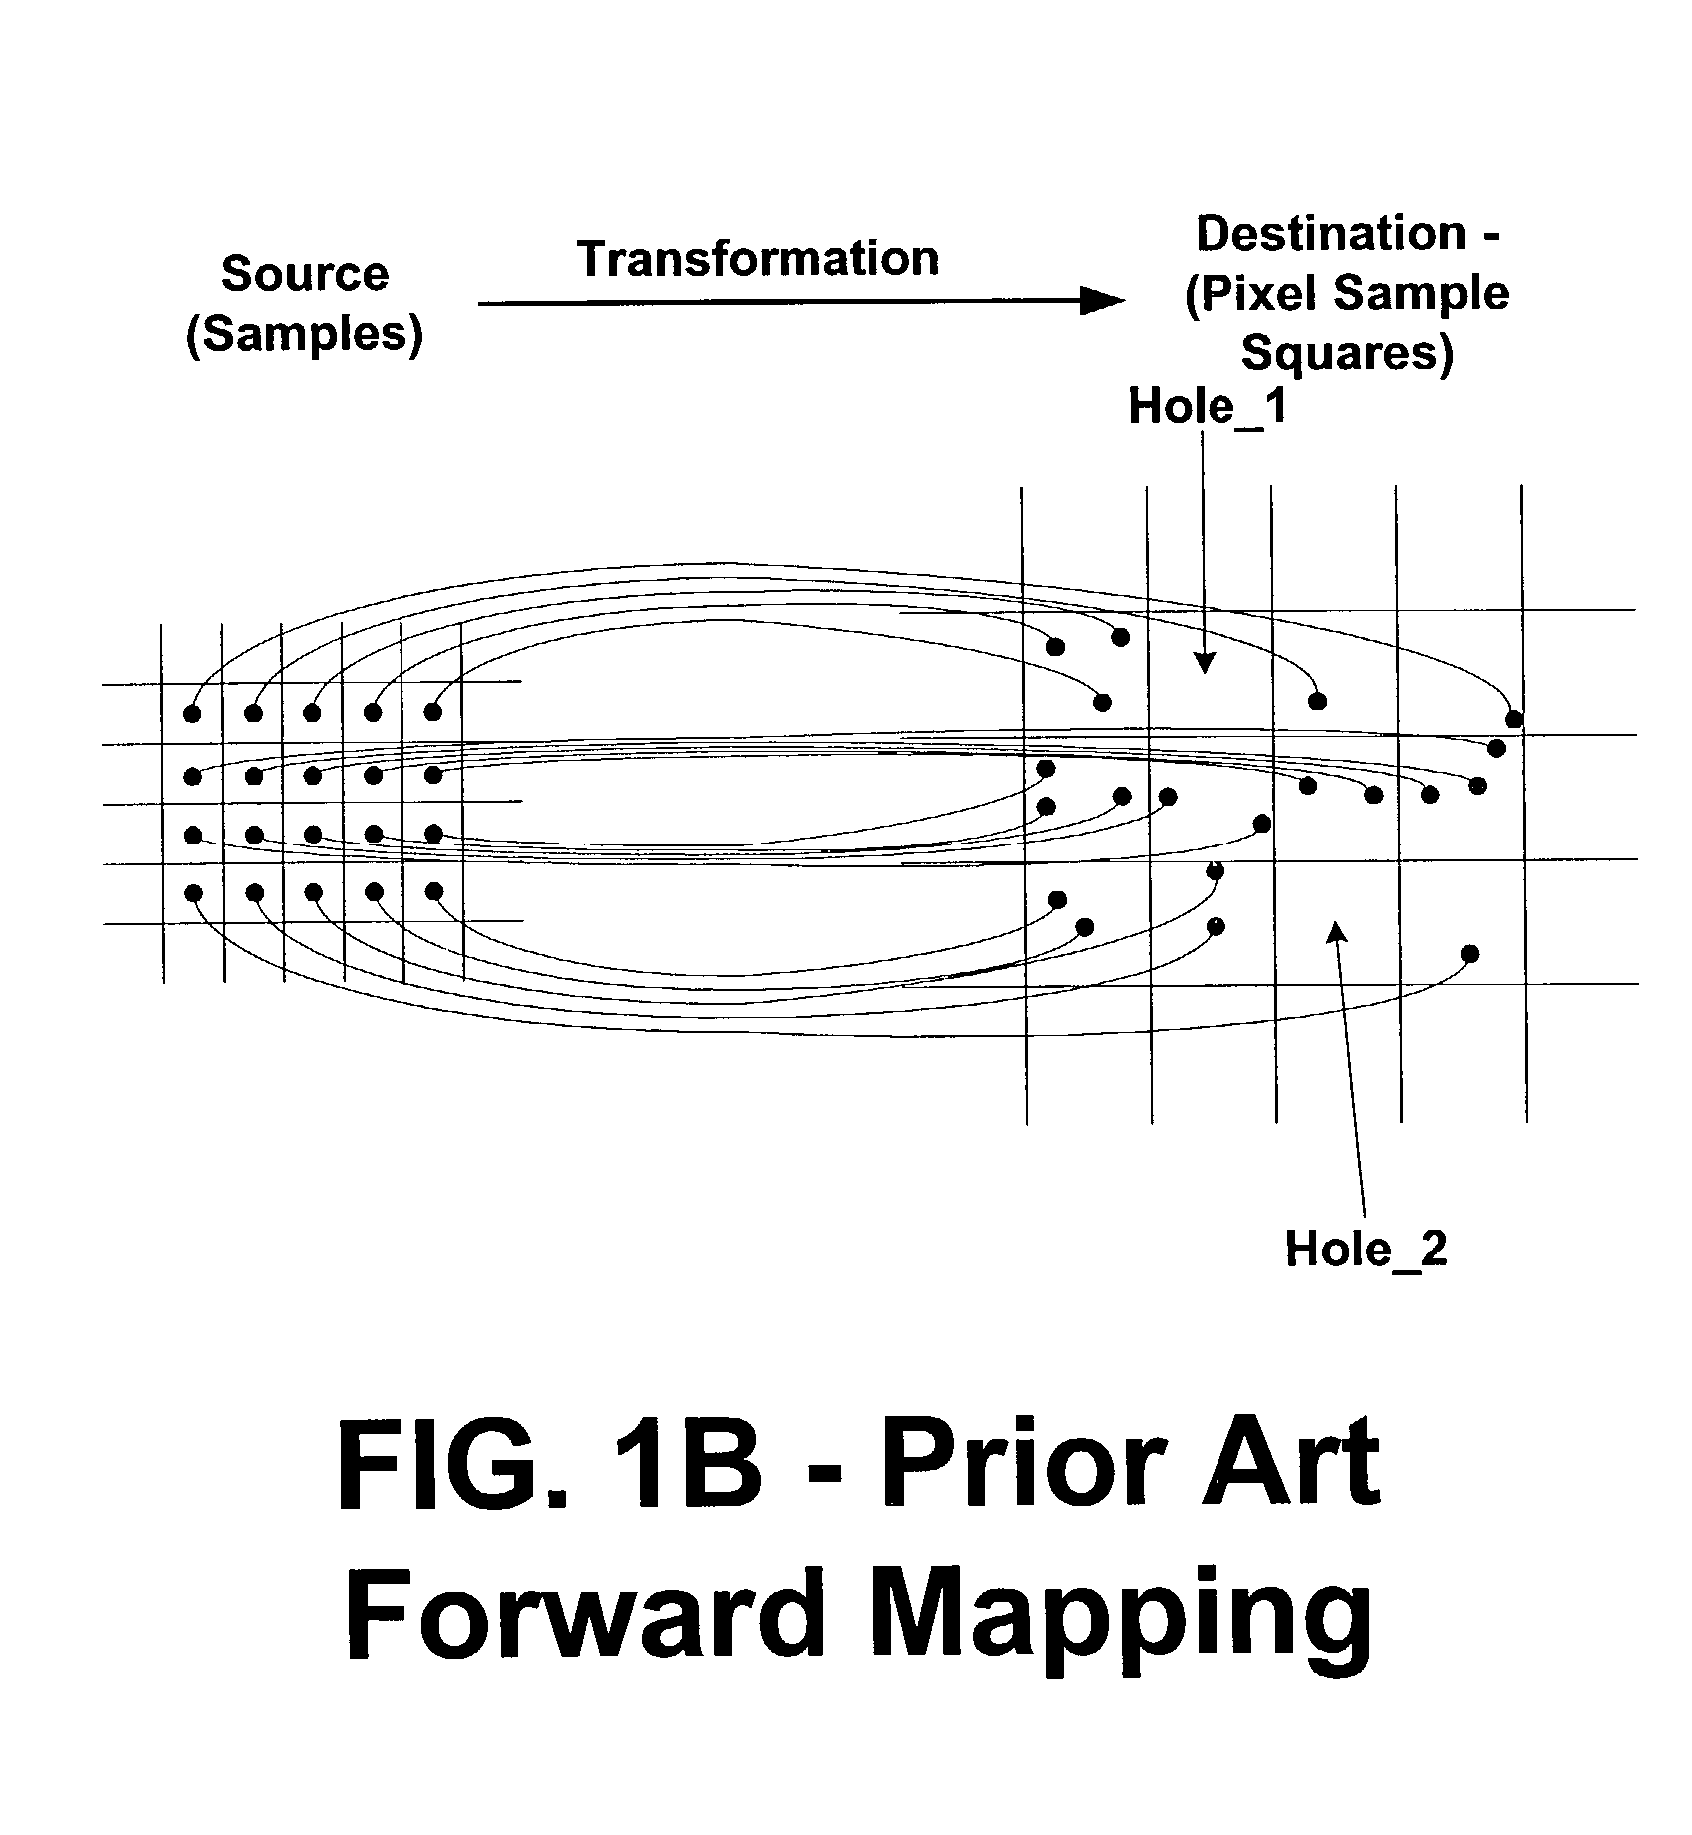 Systems and methods for providing forward mapping with visibility for and resolution of accumulated samples